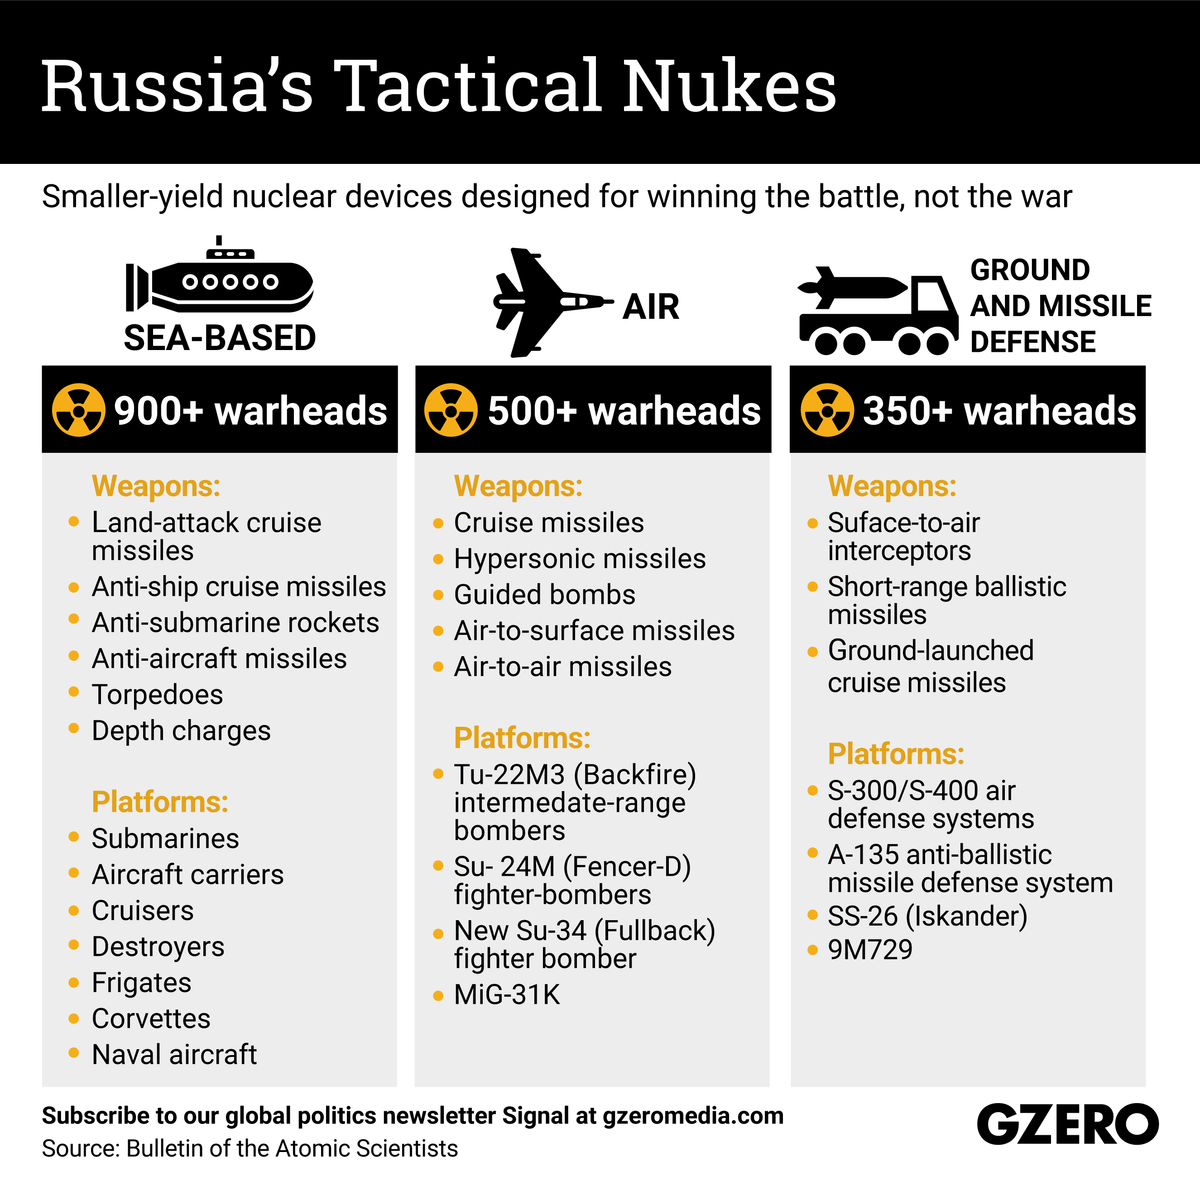 Russia's tactical nuclear weapons and how it can launch them.